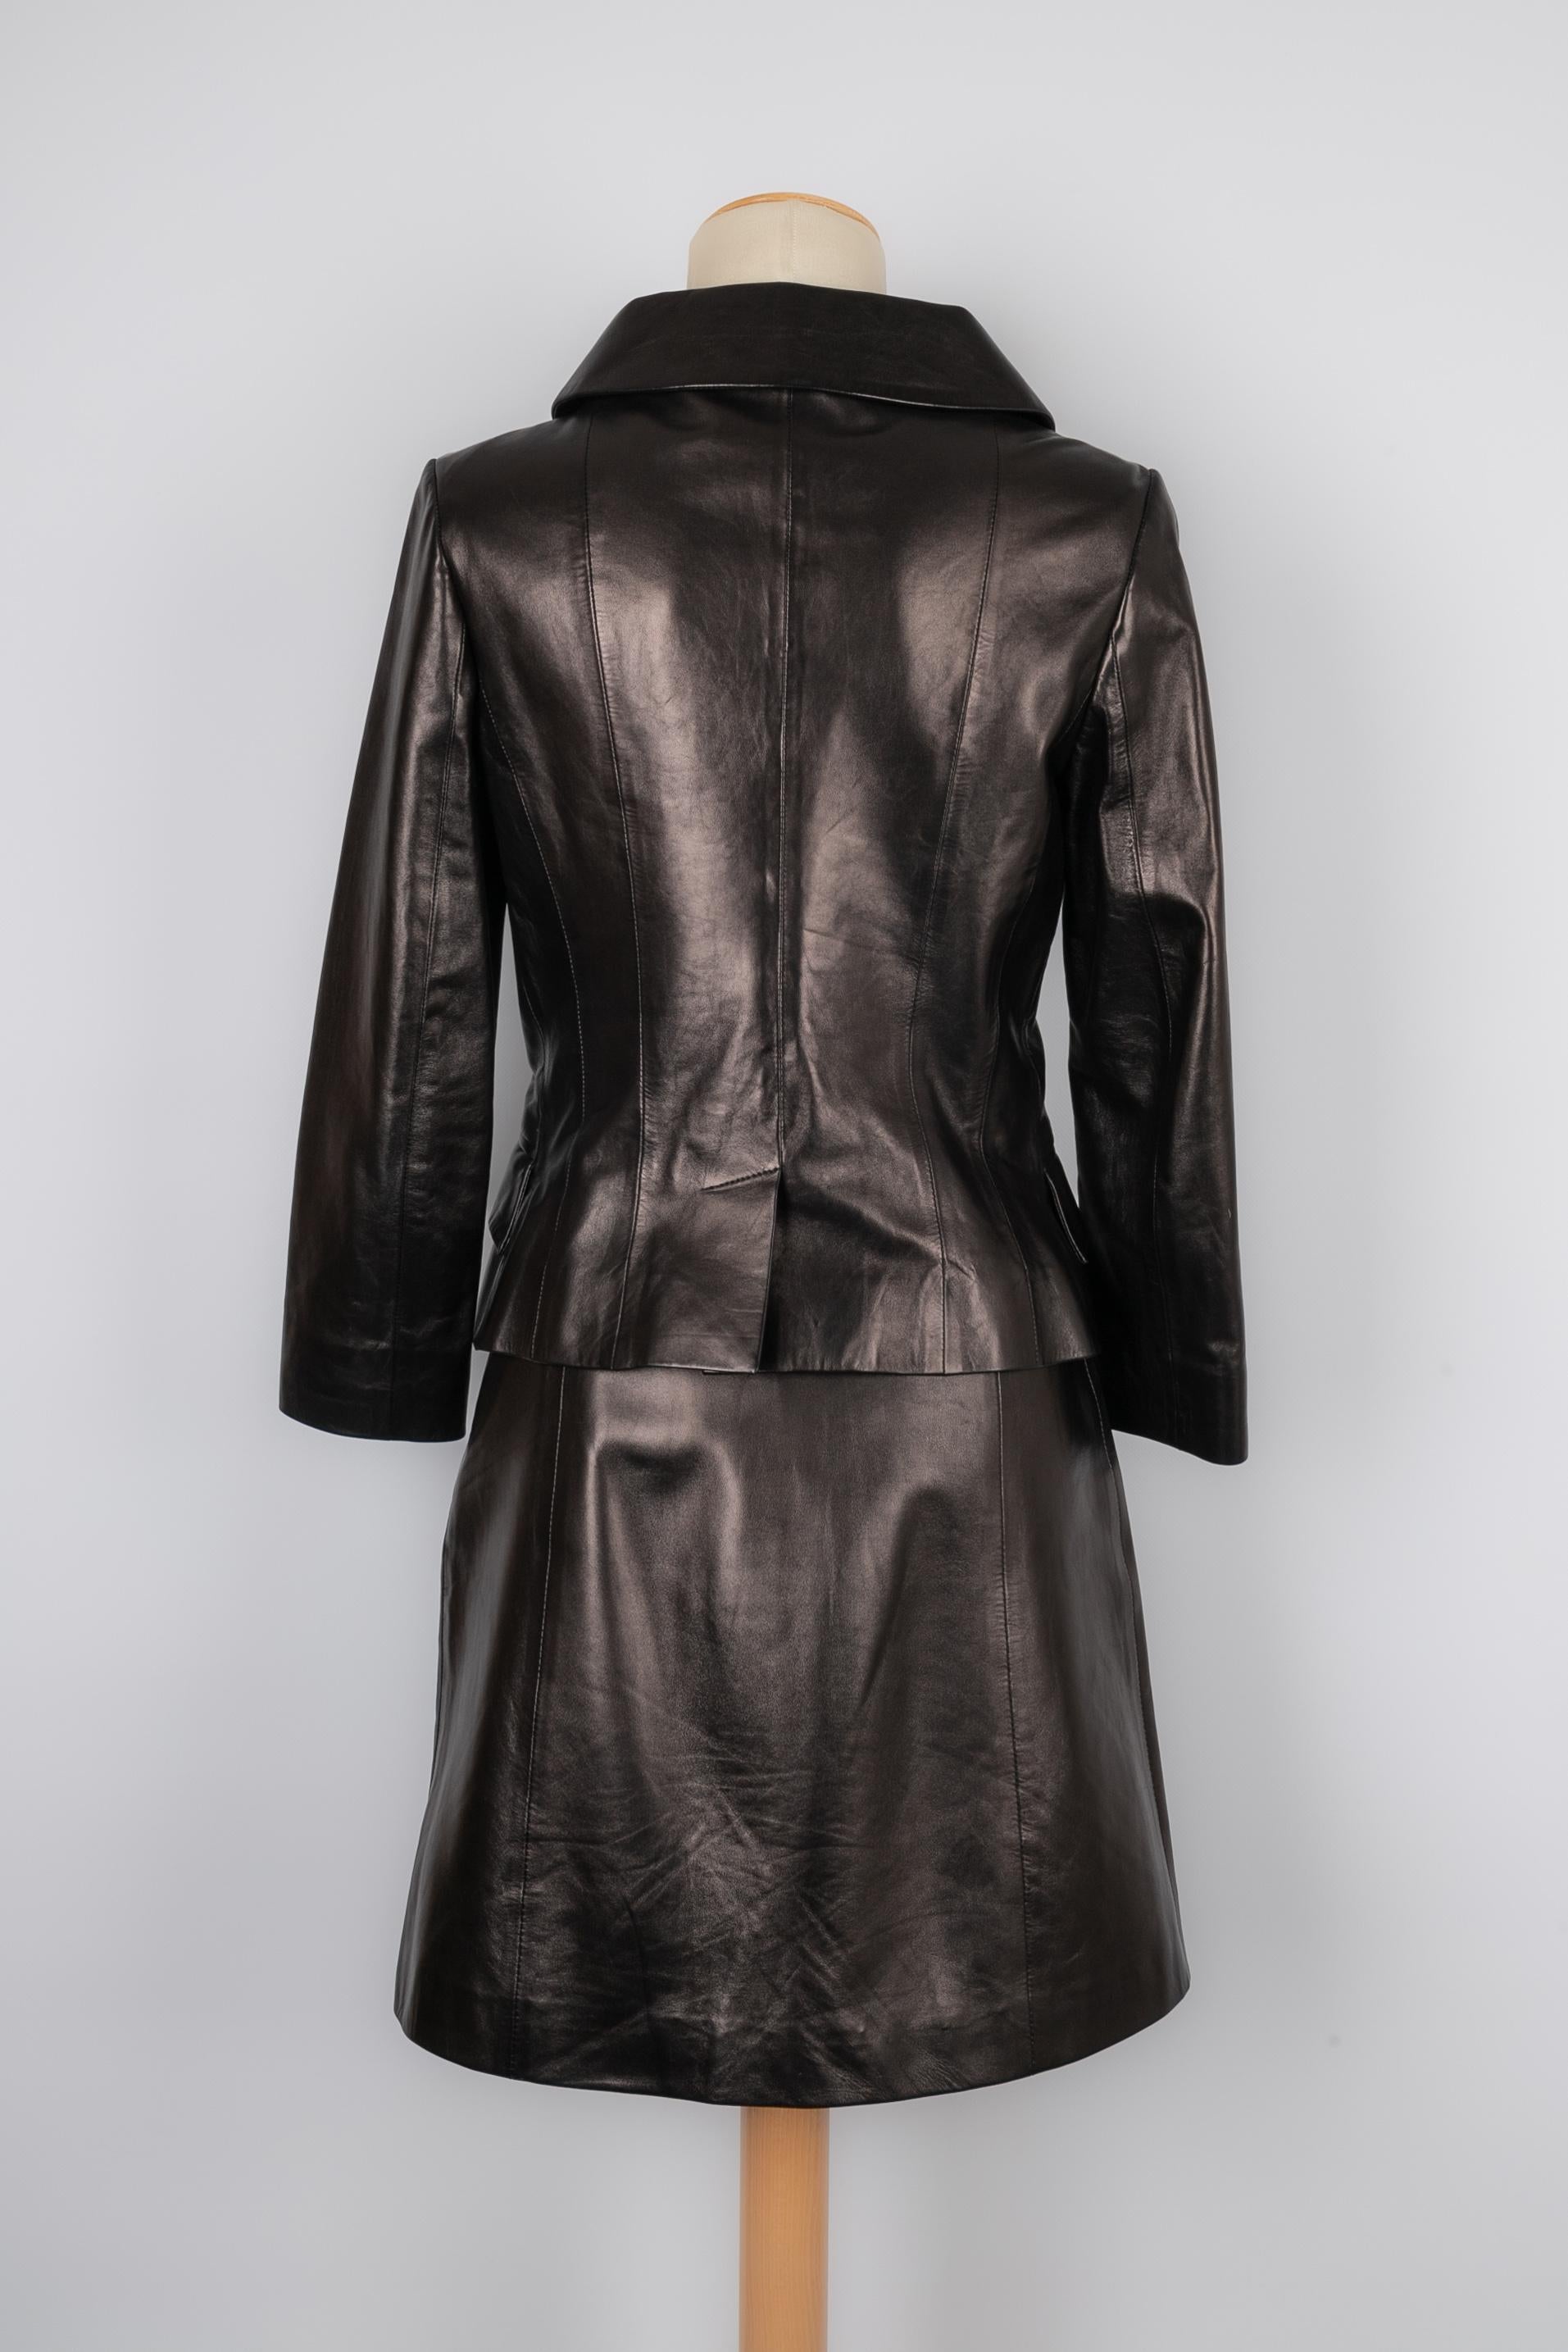 Christian Dior outfit In Excellent Condition For Sale In SAINT-OUEN-SUR-SEINE, FR